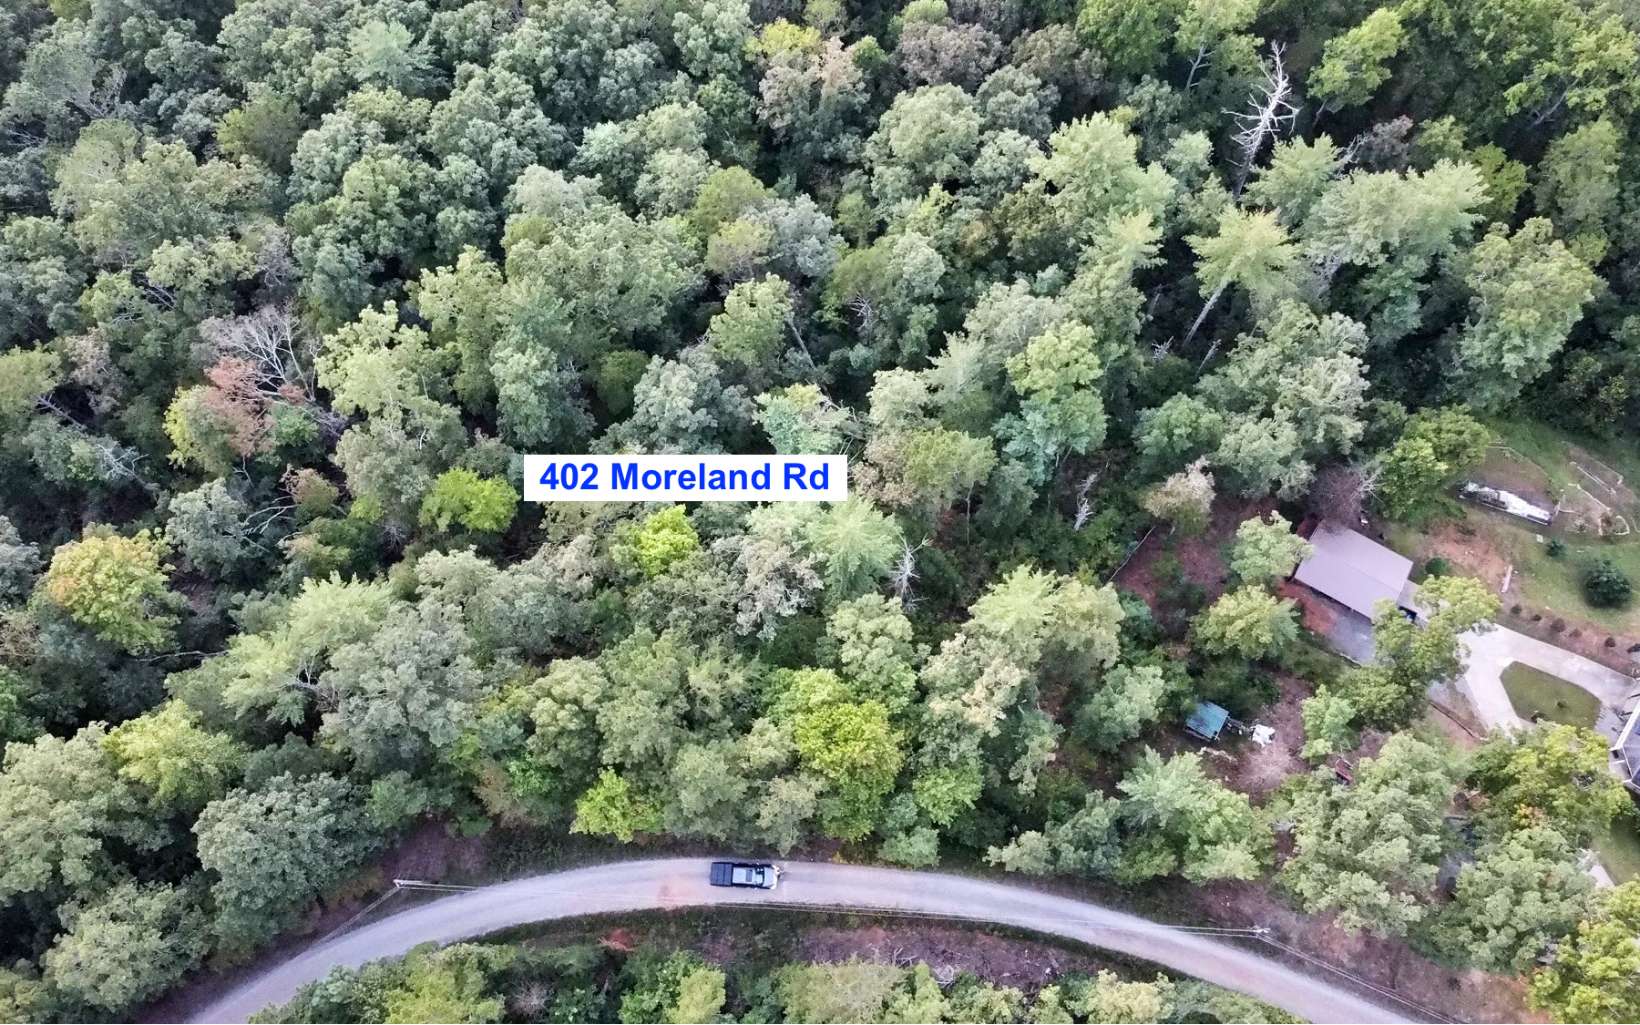 Build your primary or vacation home on this 3.84 acre lot with seasonal mountain views! This lot is located on a quiet gravel road yet within minutes of Hwy 515 and all that Ellijay has to offer including the Mountaintown Creek nearby! Septic system and non functioning drilled well already on property. Non restricted subdivision. Live the North GA mountain life!